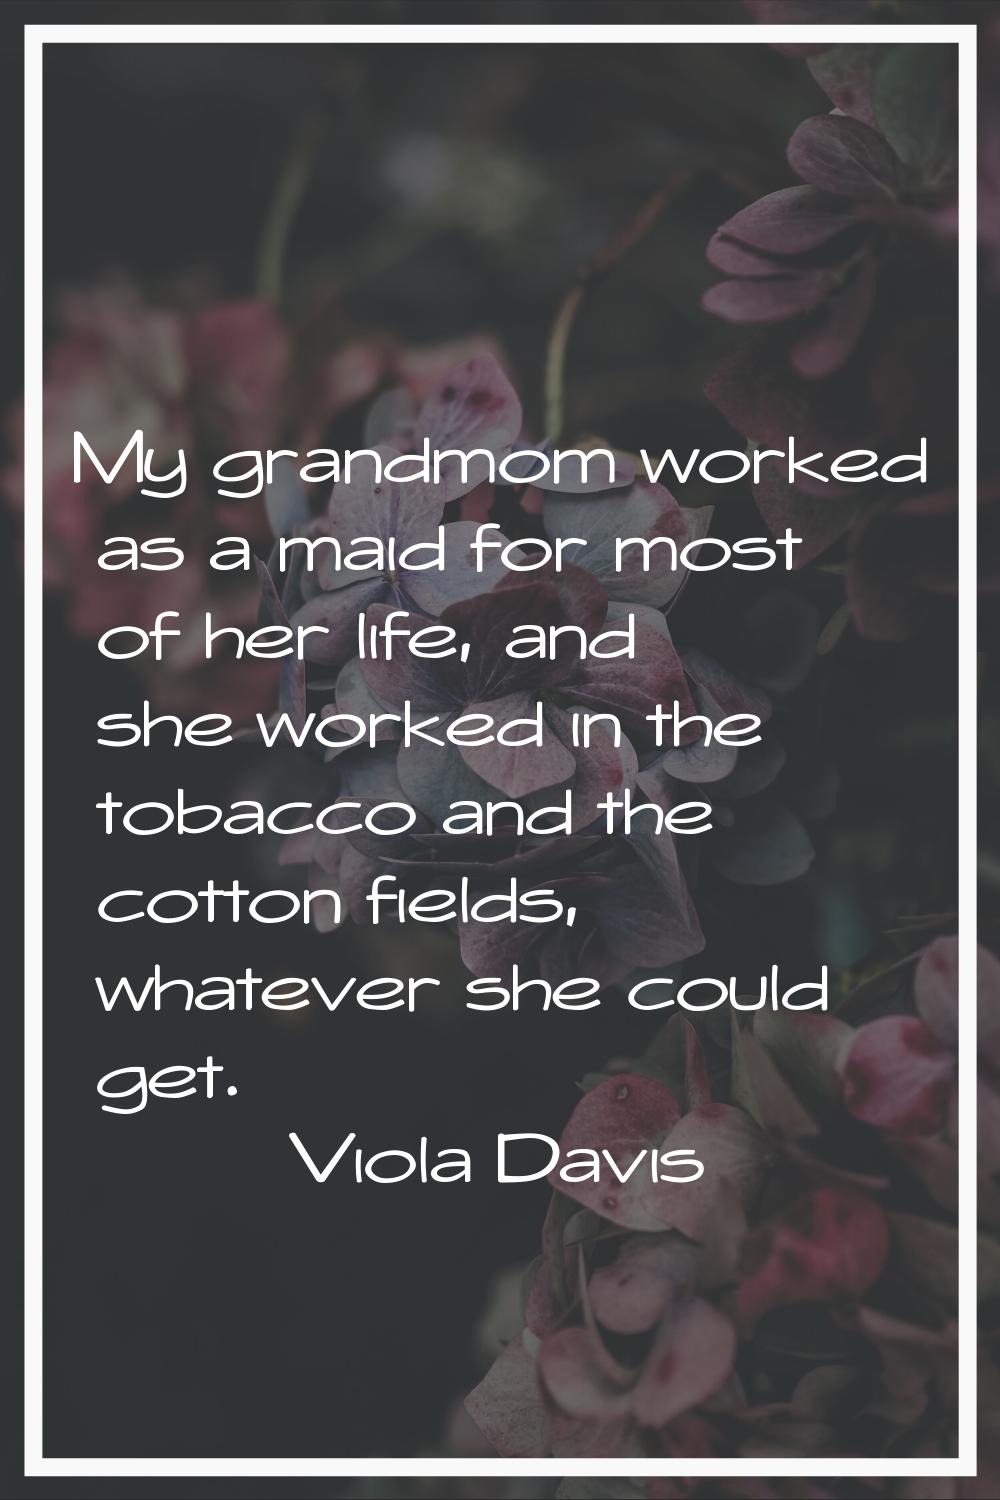 My grandmom worked as a maid for most of her life, and she worked in the tobacco and the cotton fie